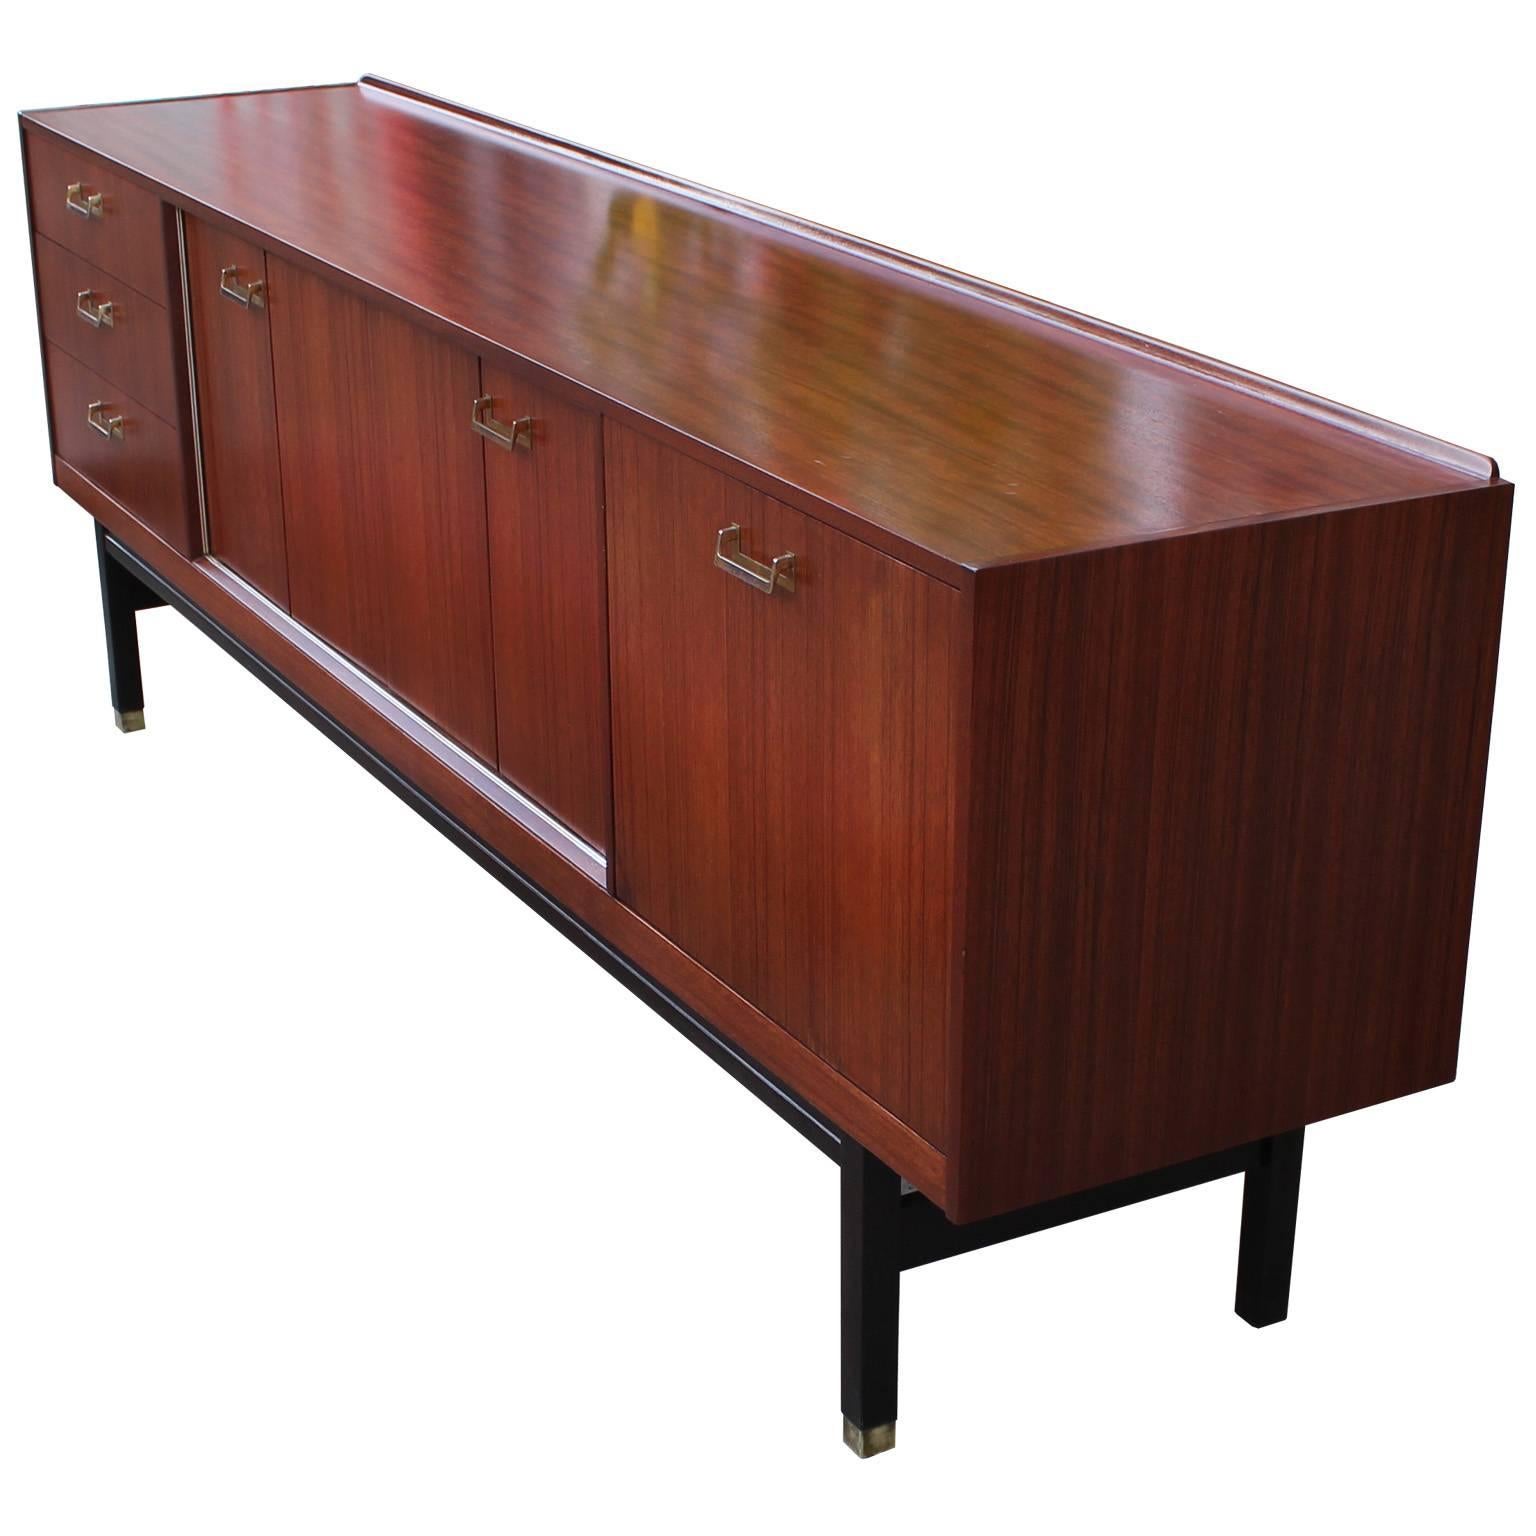 Sleek sideboard or credenza. Sideboard features beautiful grained wood veneer. Two bi-fold doors open to sectioned cabinet space. Laminate lined drop down door reveals open cabinet space. Three drawers provide additional storage. Rests upon a black